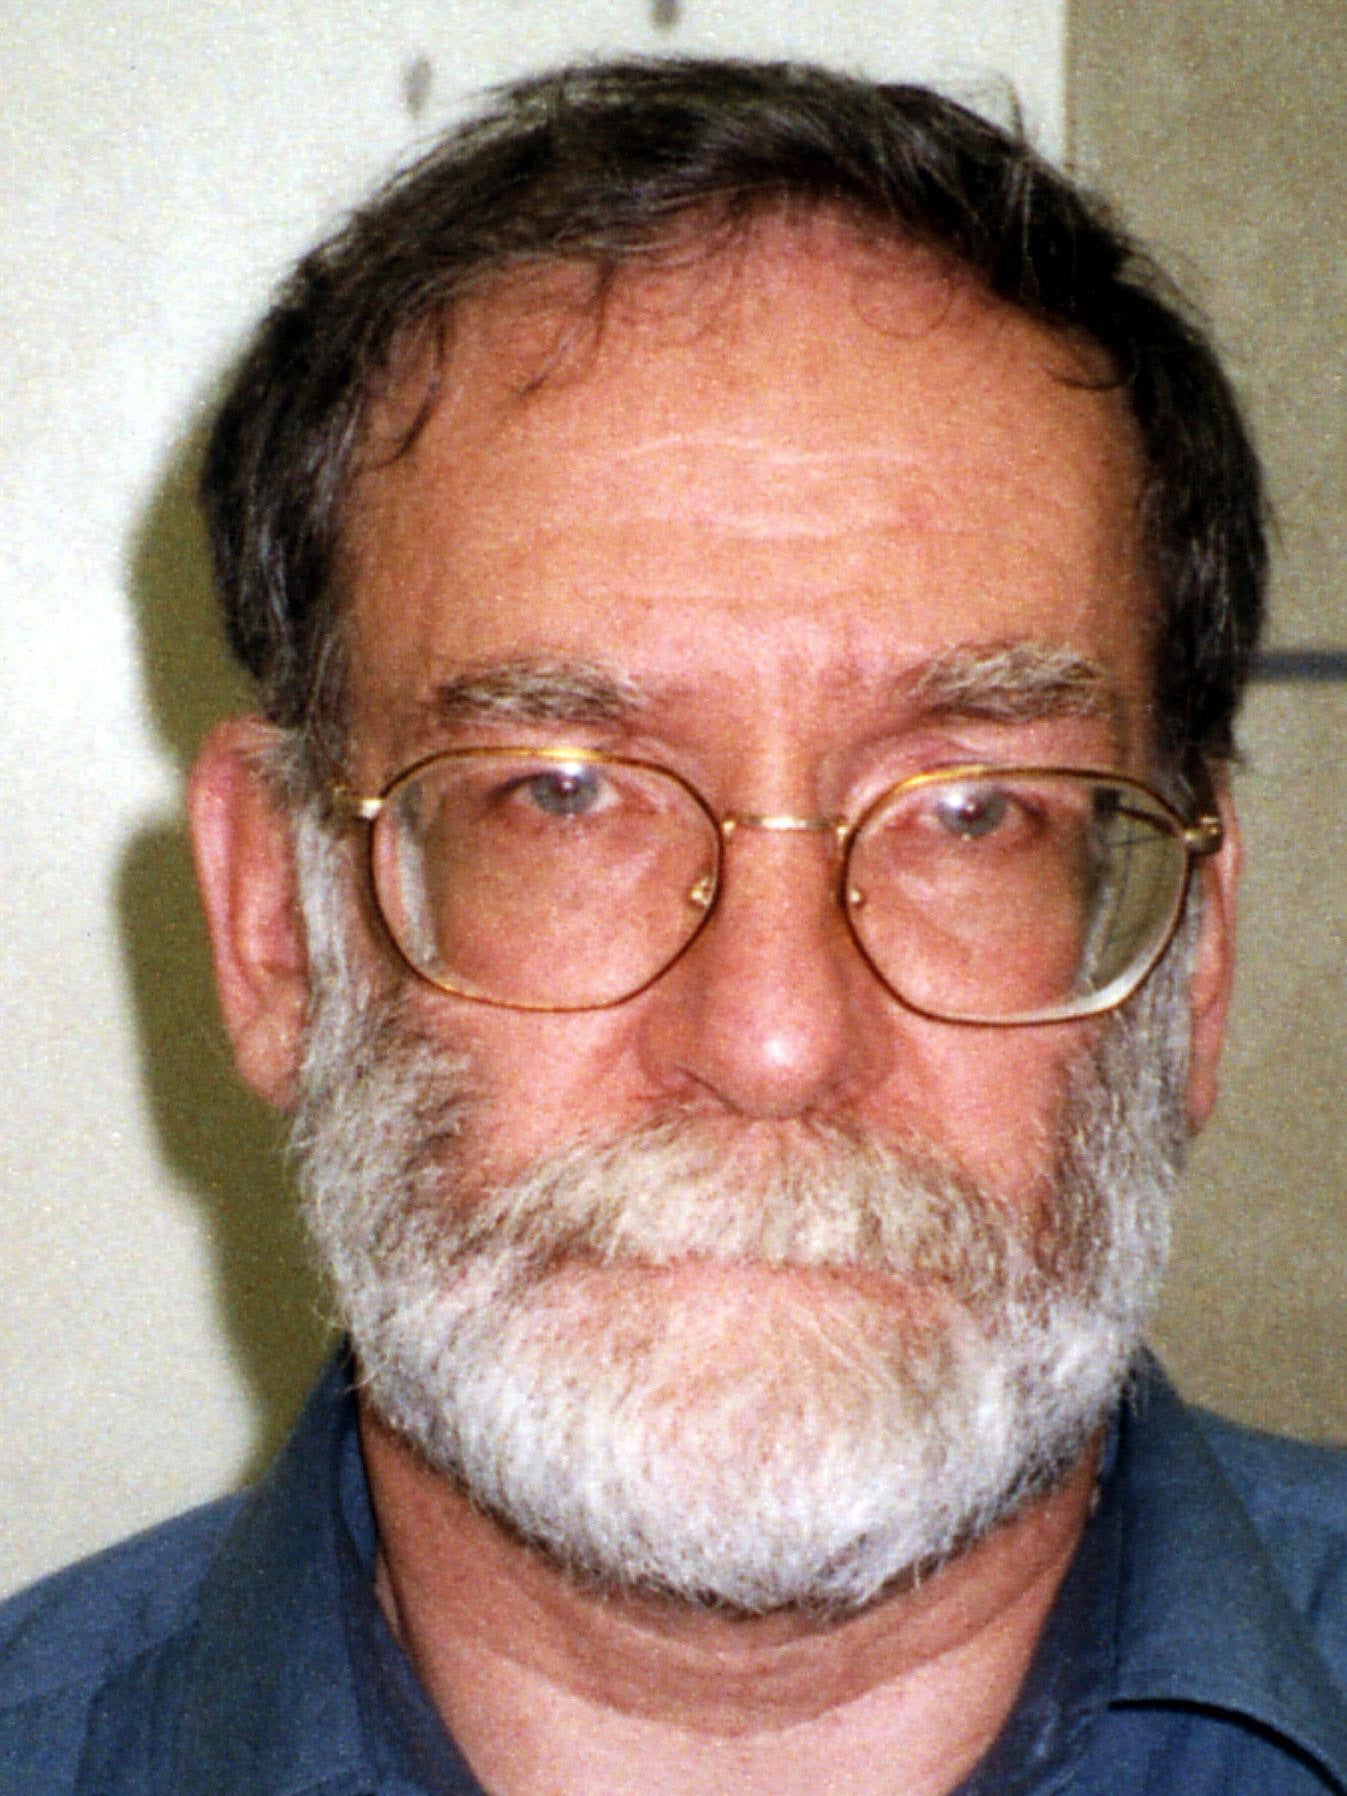 In the UK, Dr Harold Shipman killed a number of his patients estimated in the hundreds